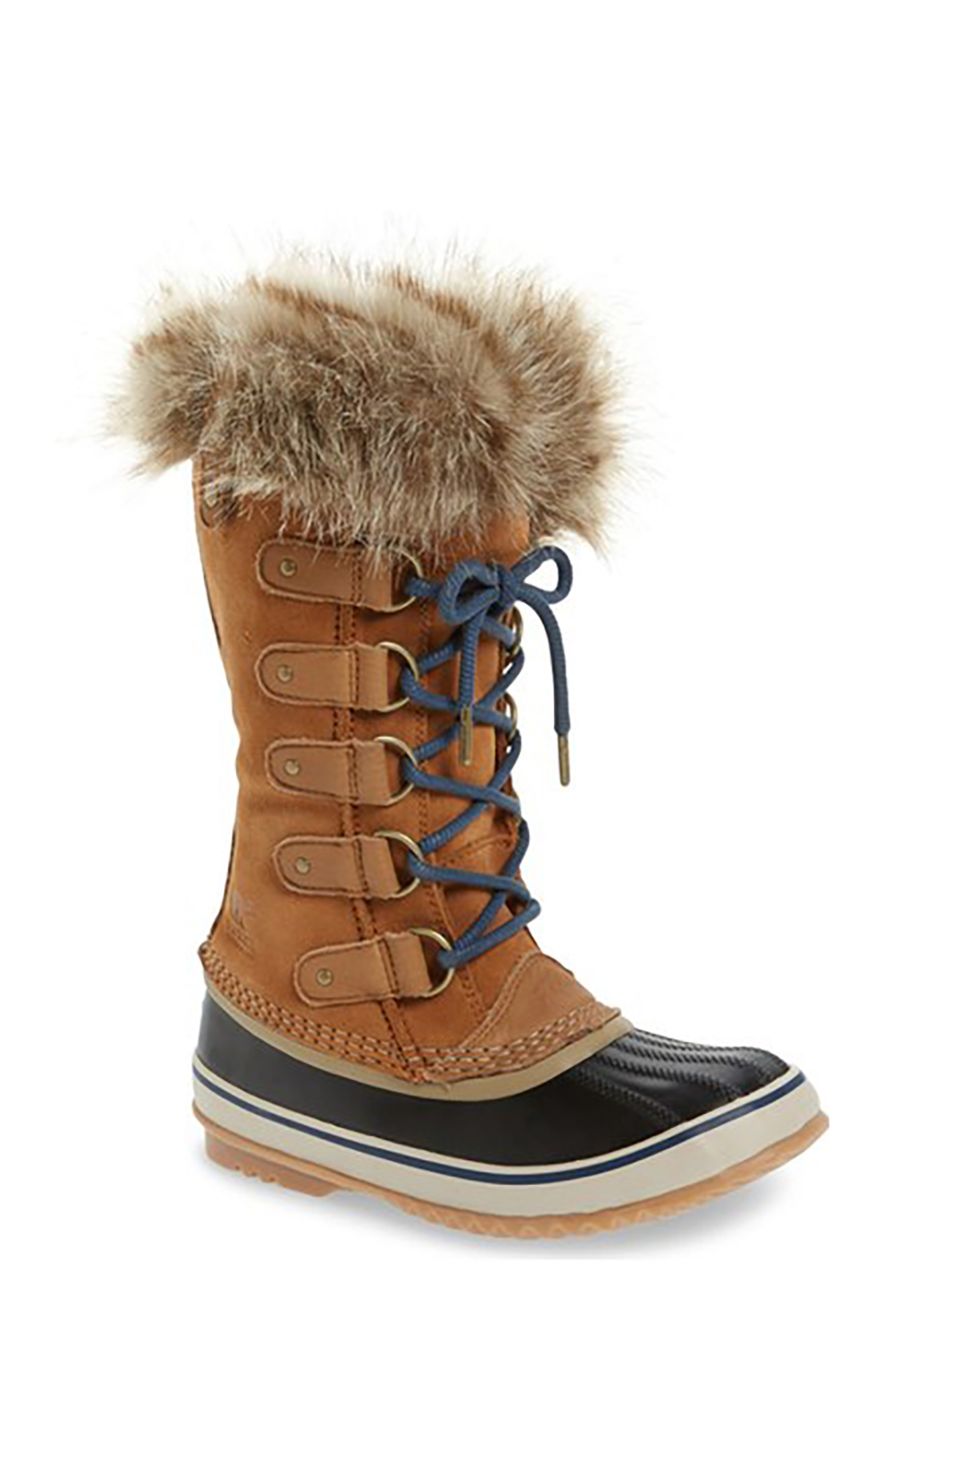 Brown, Boot, Costume accessory, Tan, Natural material, Beige, Fur, Leather, Fawn, Snow boot, 